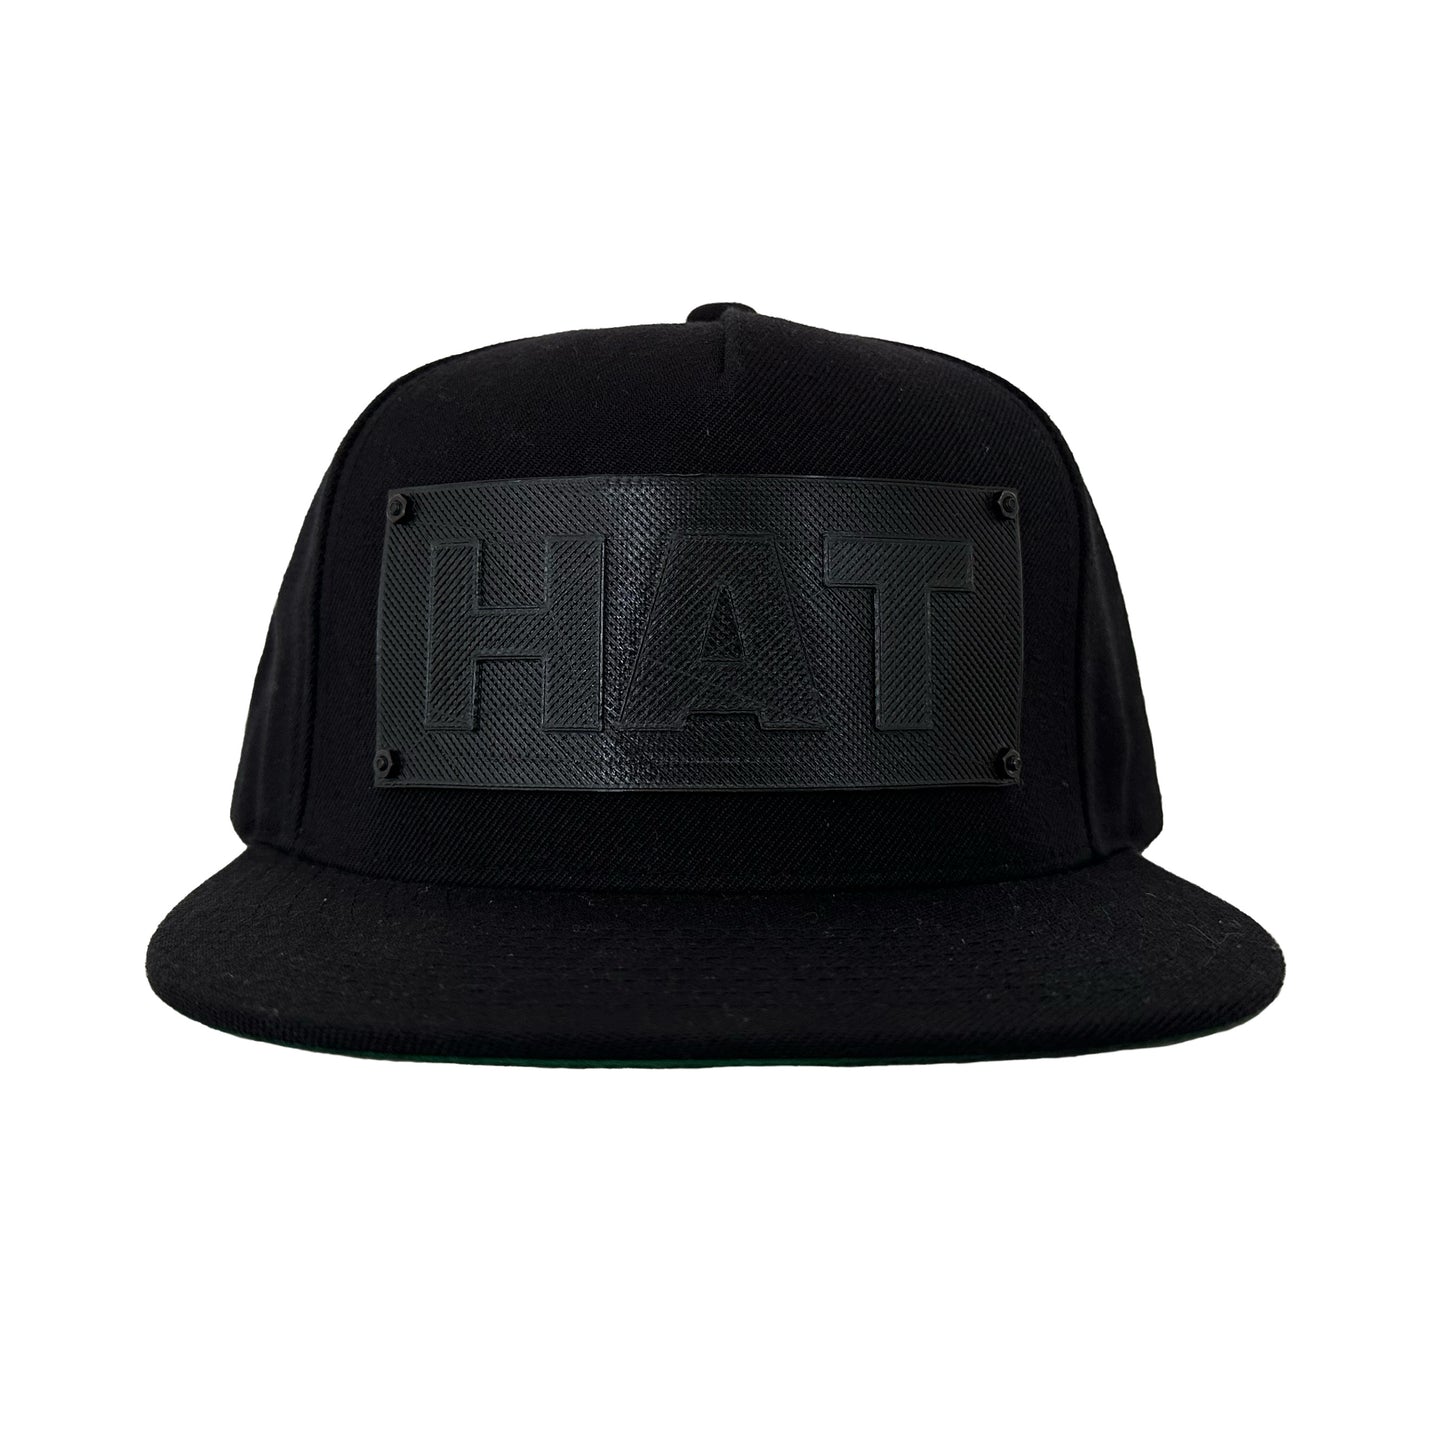 A black snapback baseball hat with a black logo panel that says"HAT".